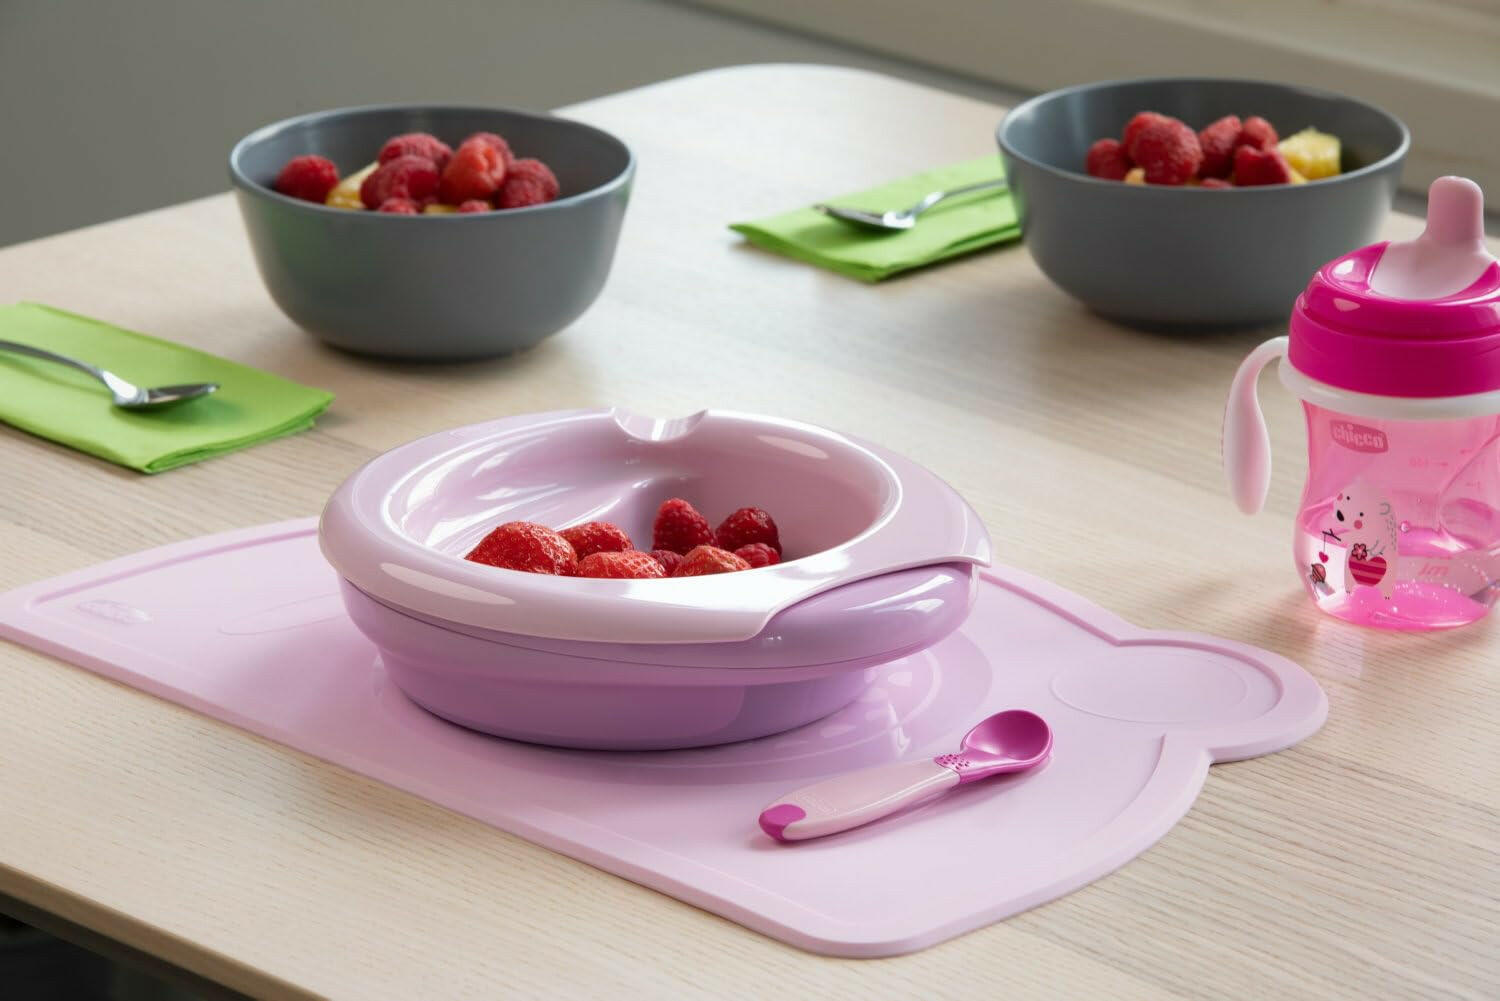 Chicco First Food Spoon Angled 8M + Soft Silicone Pink [Girl].